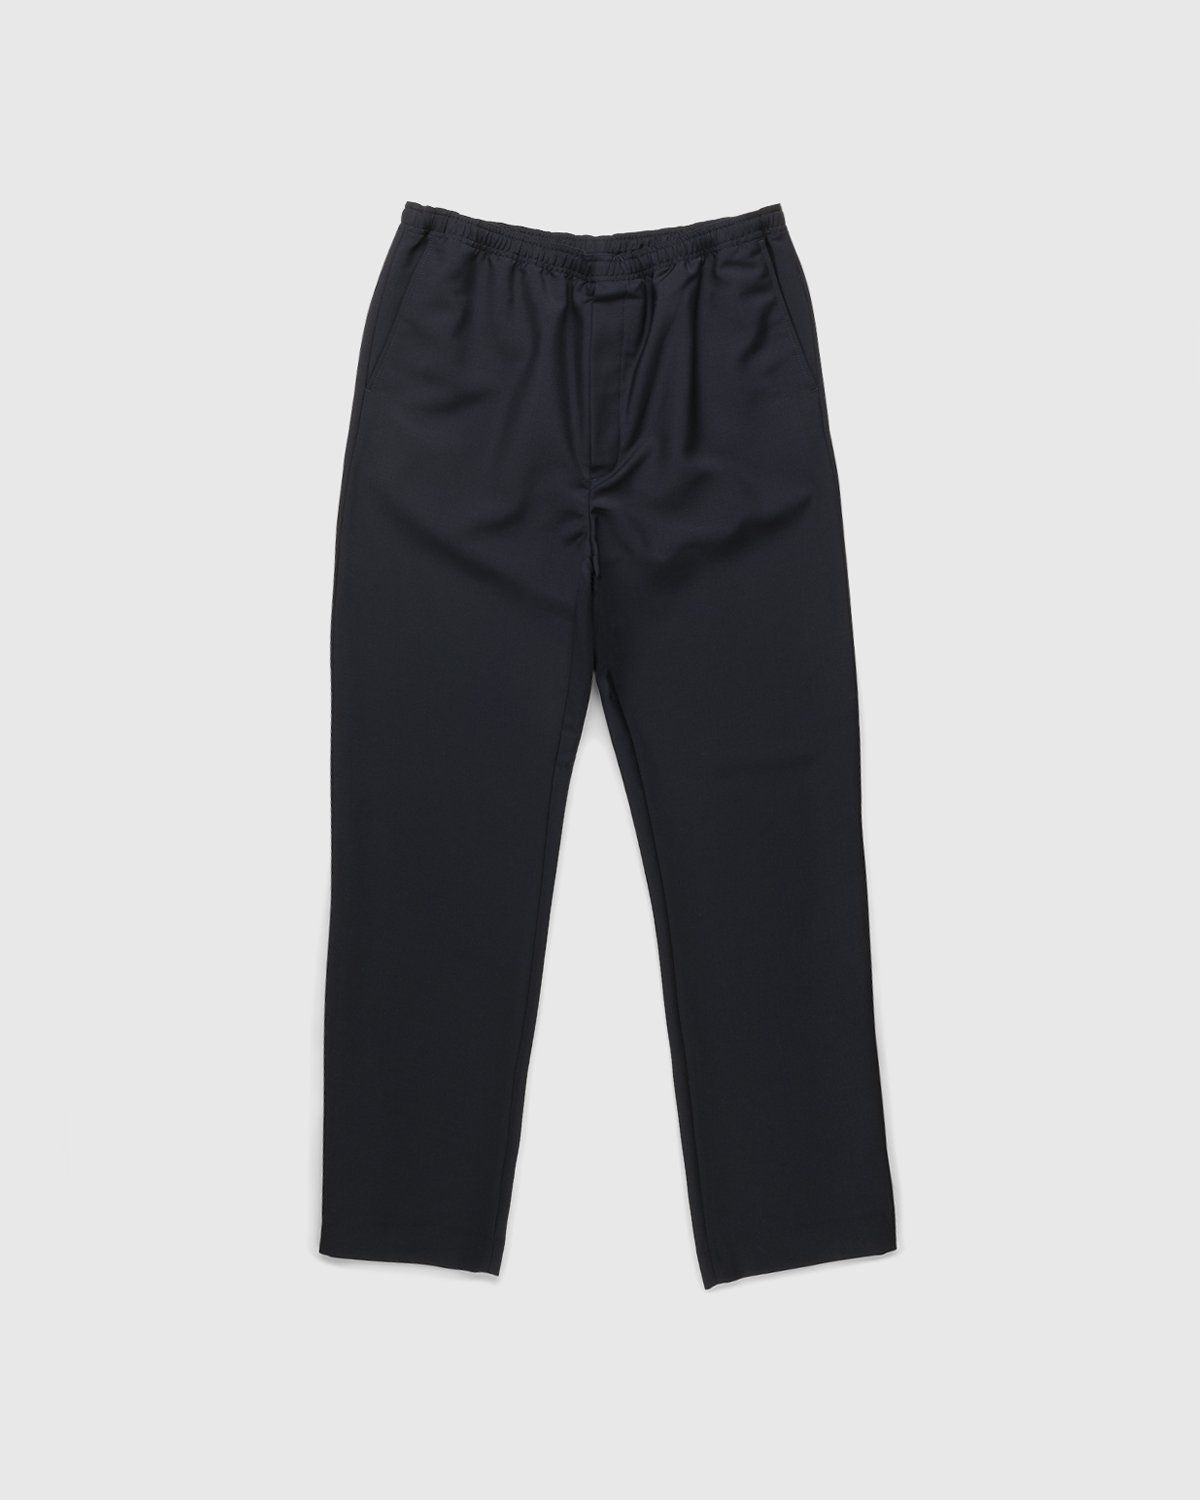 Acne Studios – Mohair Blend Drawstring Trousers Navy - Trousers - Blue - Image 1